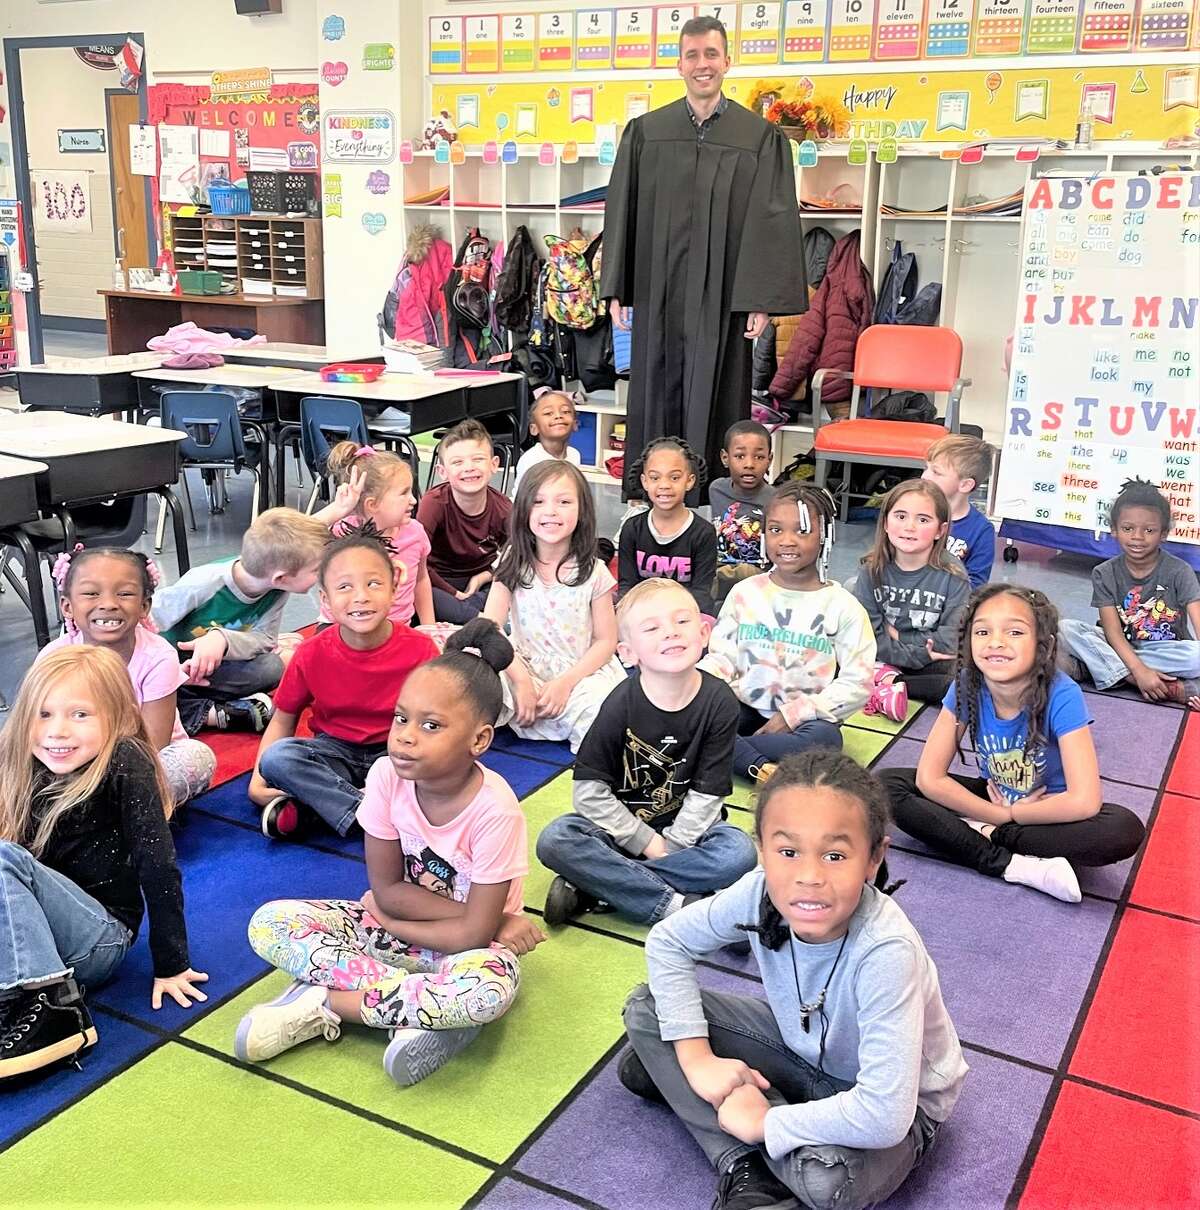 Associate Judge Justin Zimmerman participated in “Judges Go to School Day” Monday. Three judges from the 3rd Circuit went to Lovejoy, Eunice Smith and Lewis & Clark elementary schools in the Alton School District and read to young students. The program is a project of the Illinois Judges Association aimed at children in grades K – 4 to encourage the appreciation, value and enjoyment of reading.